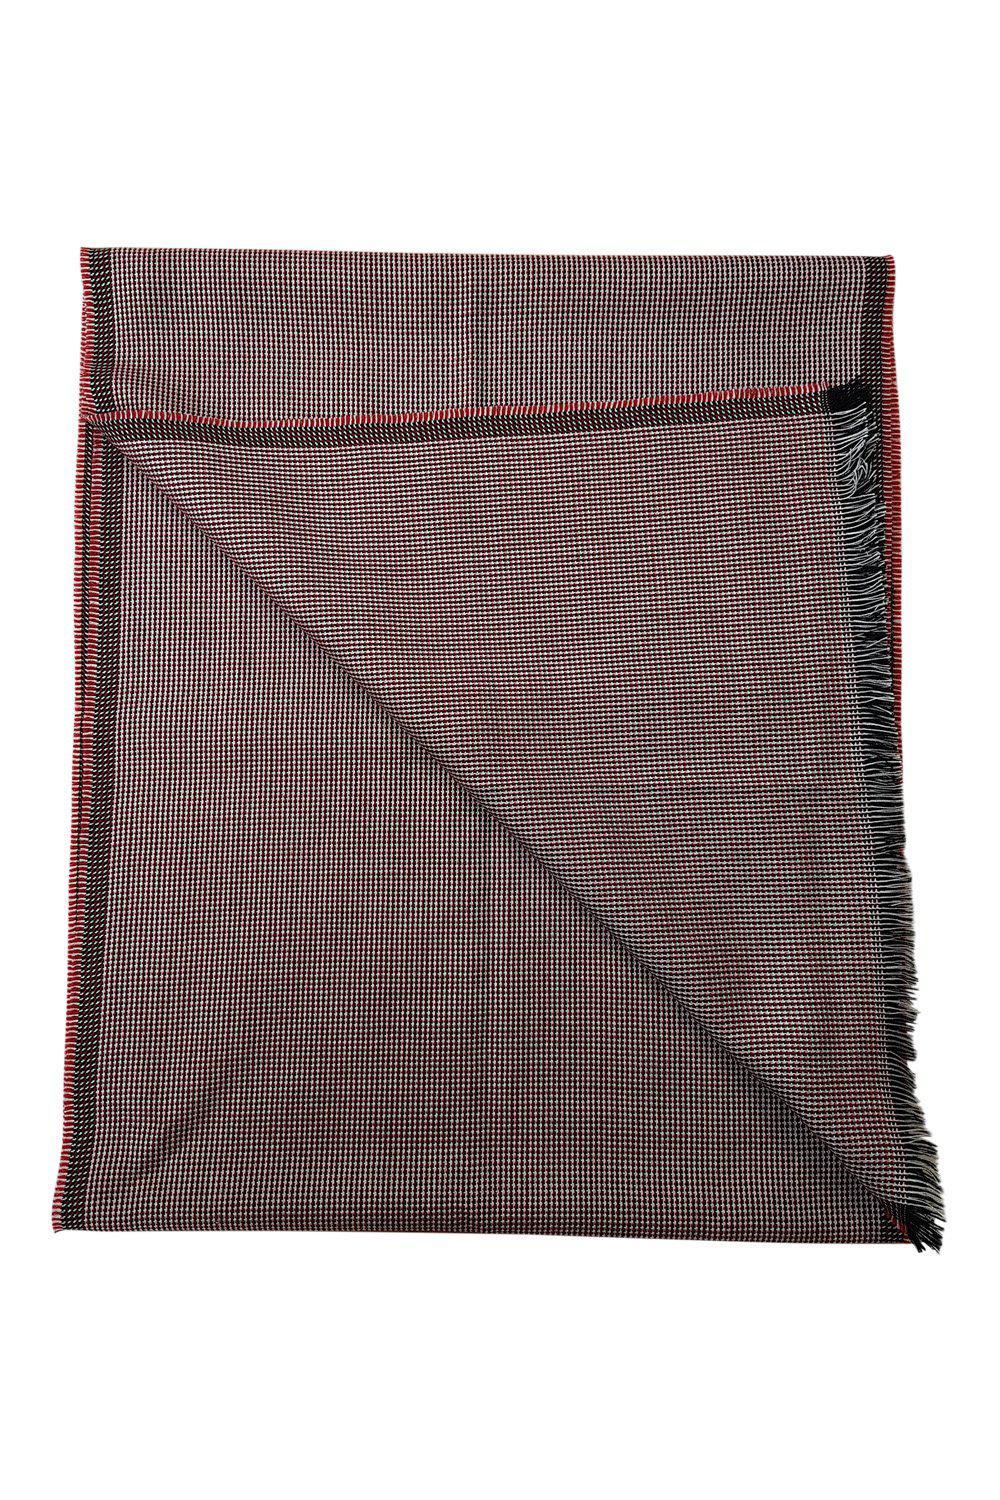 CHRISTIAN DIOR Red White Blue Checked Rectangular Wool Stole 60"x15"-Christian Dior-The Freperie